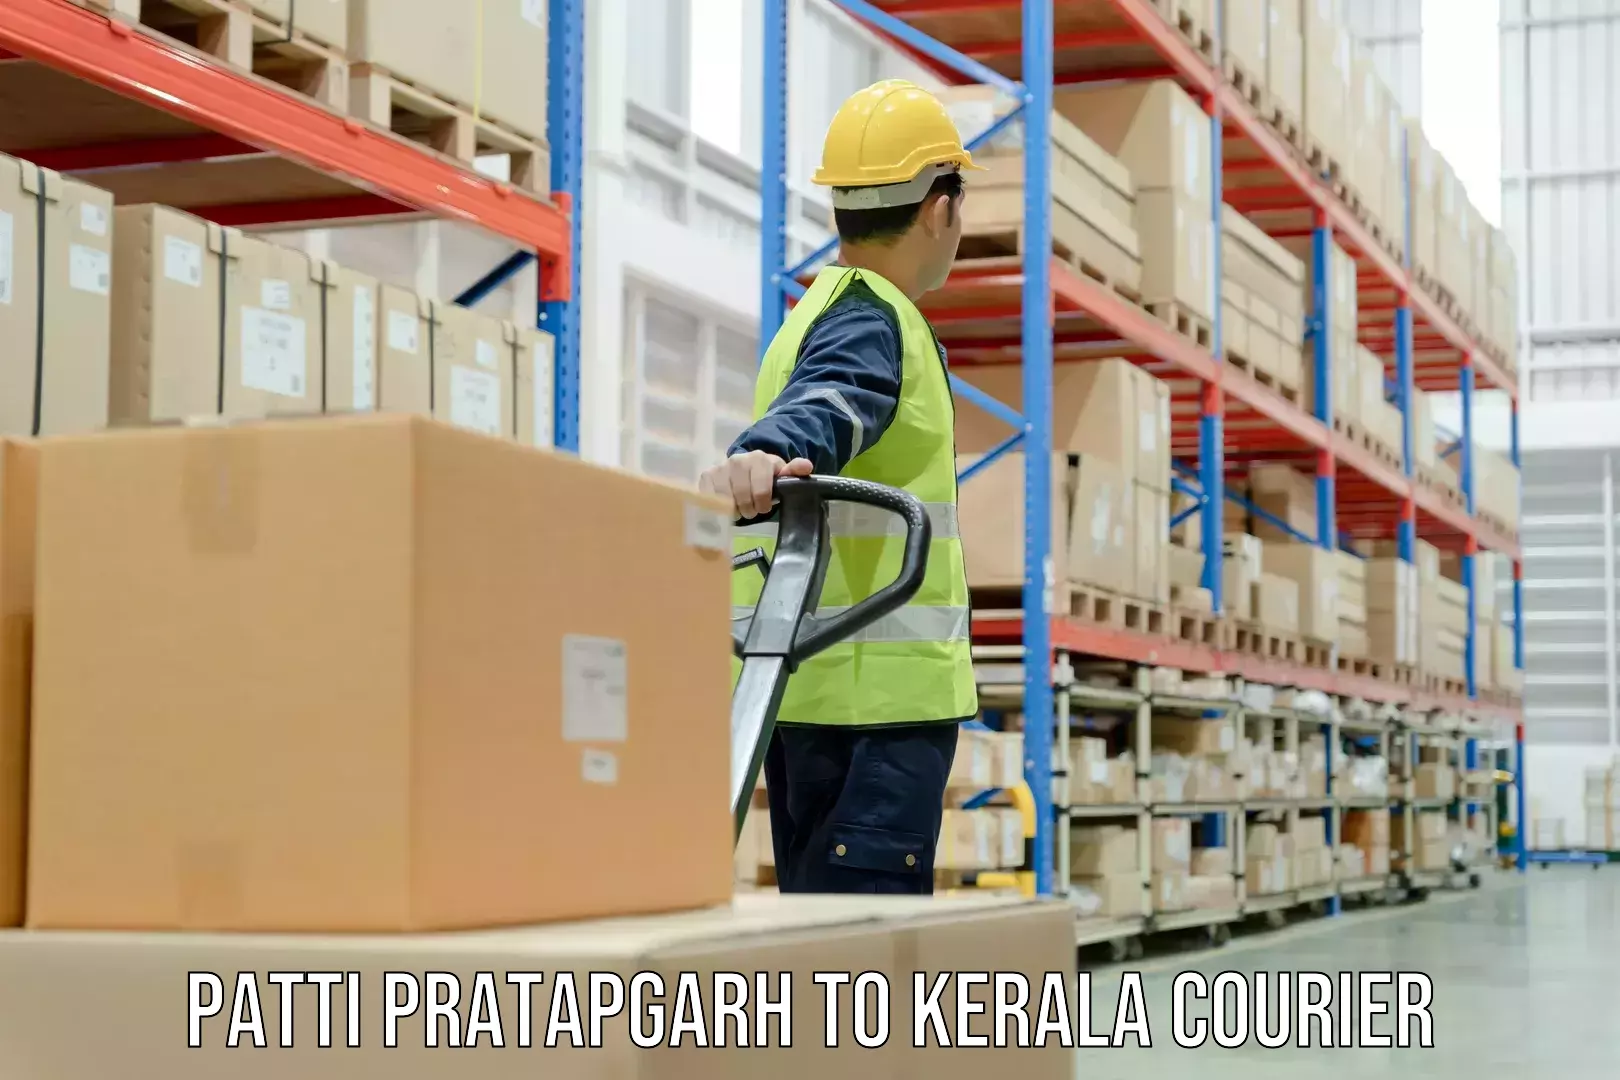 Nationwide parcel services Patti Pratapgarh to Cochin University of Science and Technology